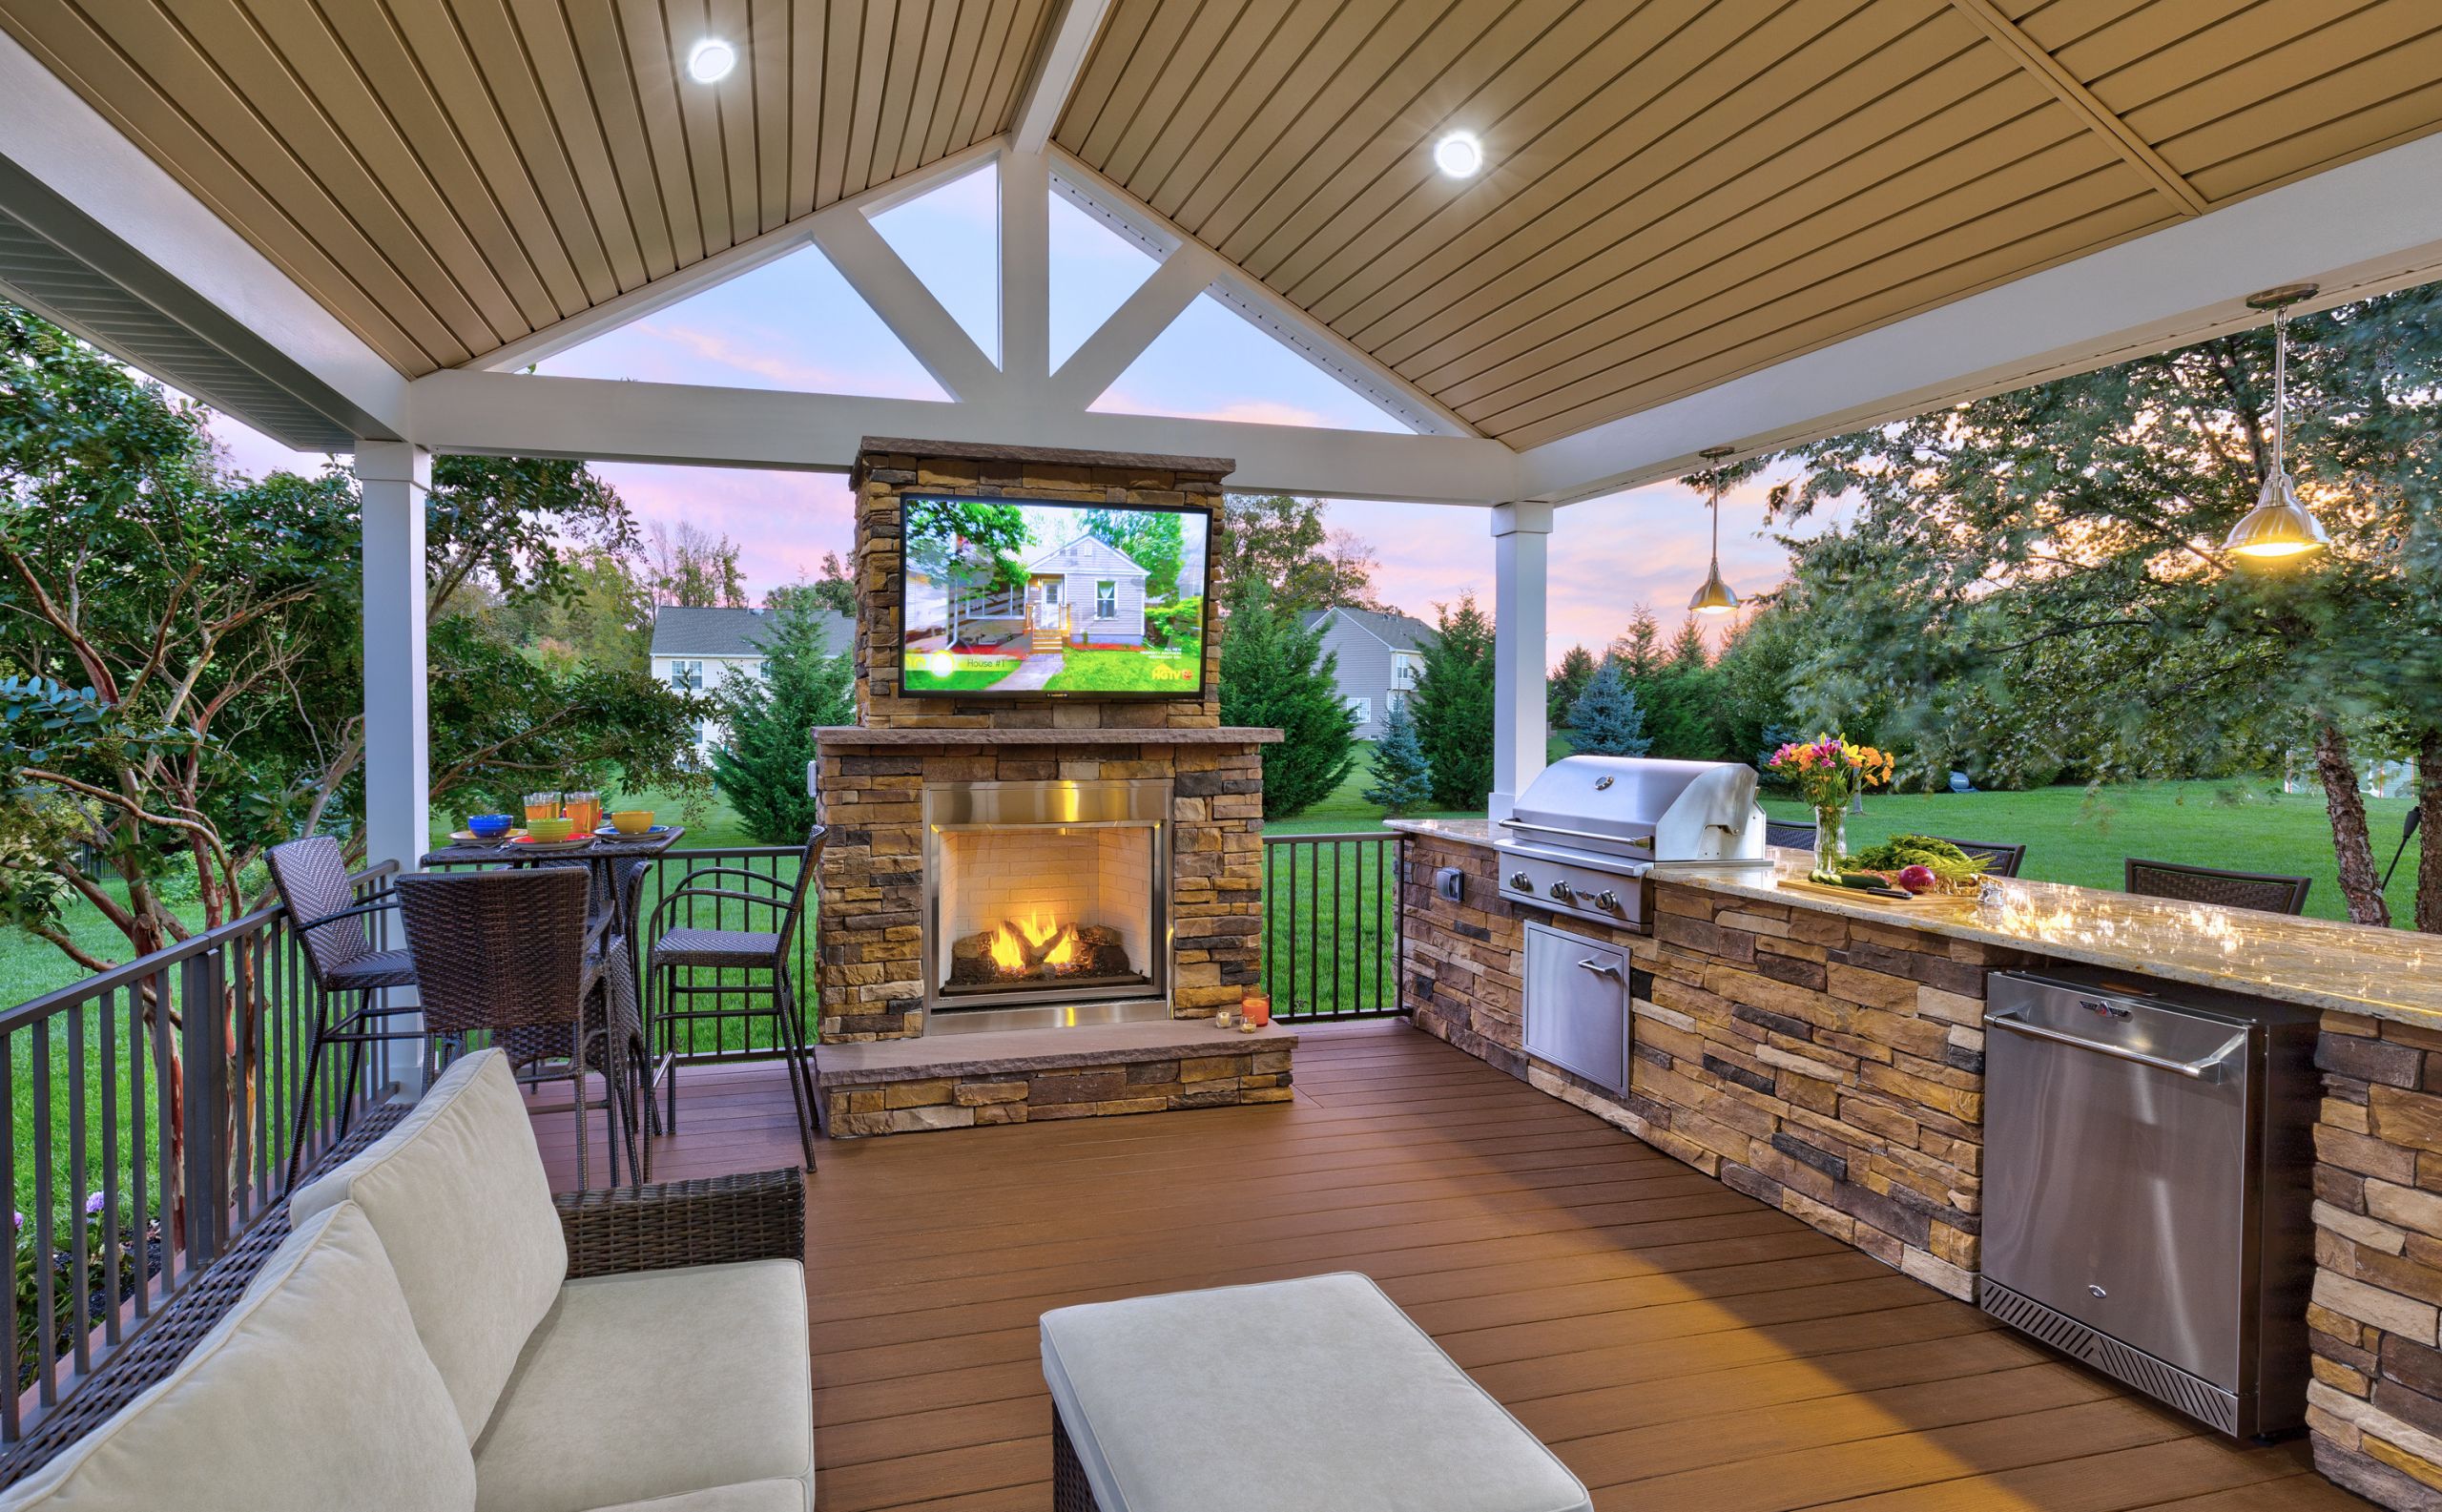 Outdoor Kitchen Designs With Fireplace
 outdoor kitchen fireplace television or sound system